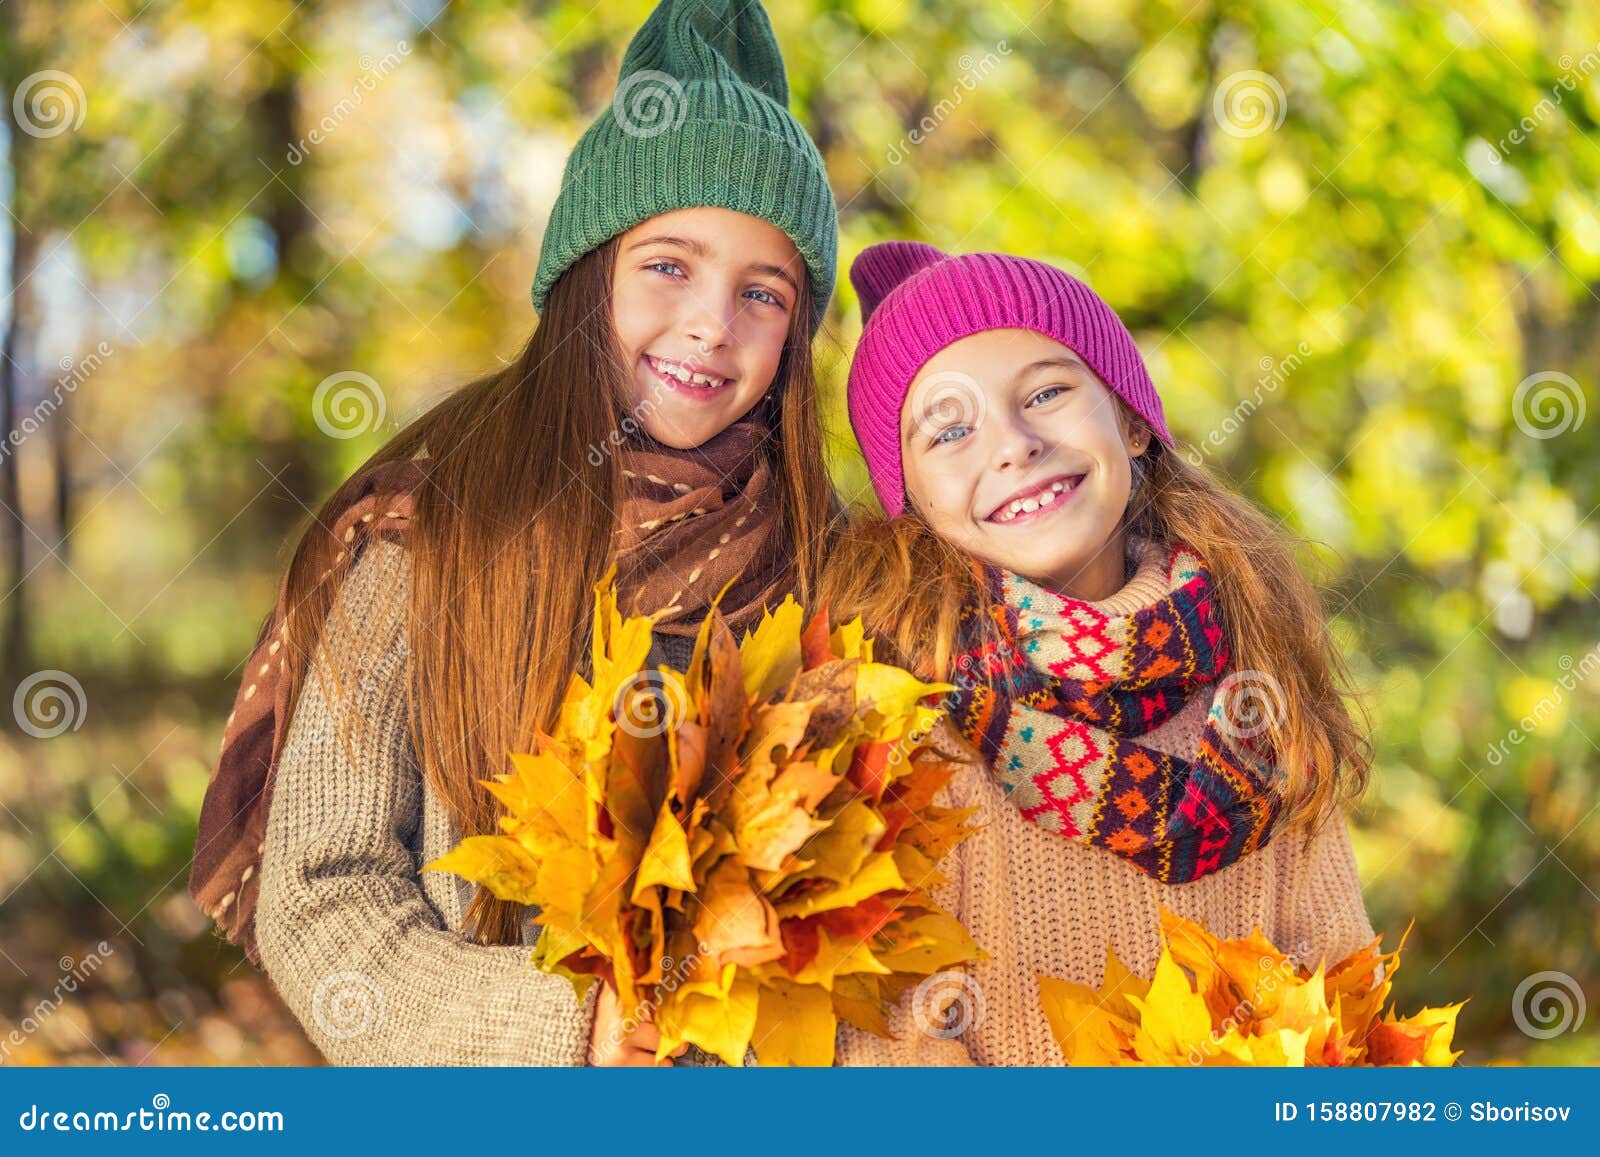 Two Cute Smiling 8 Years Old Girls Posing Together in a Park on a Sunny ...